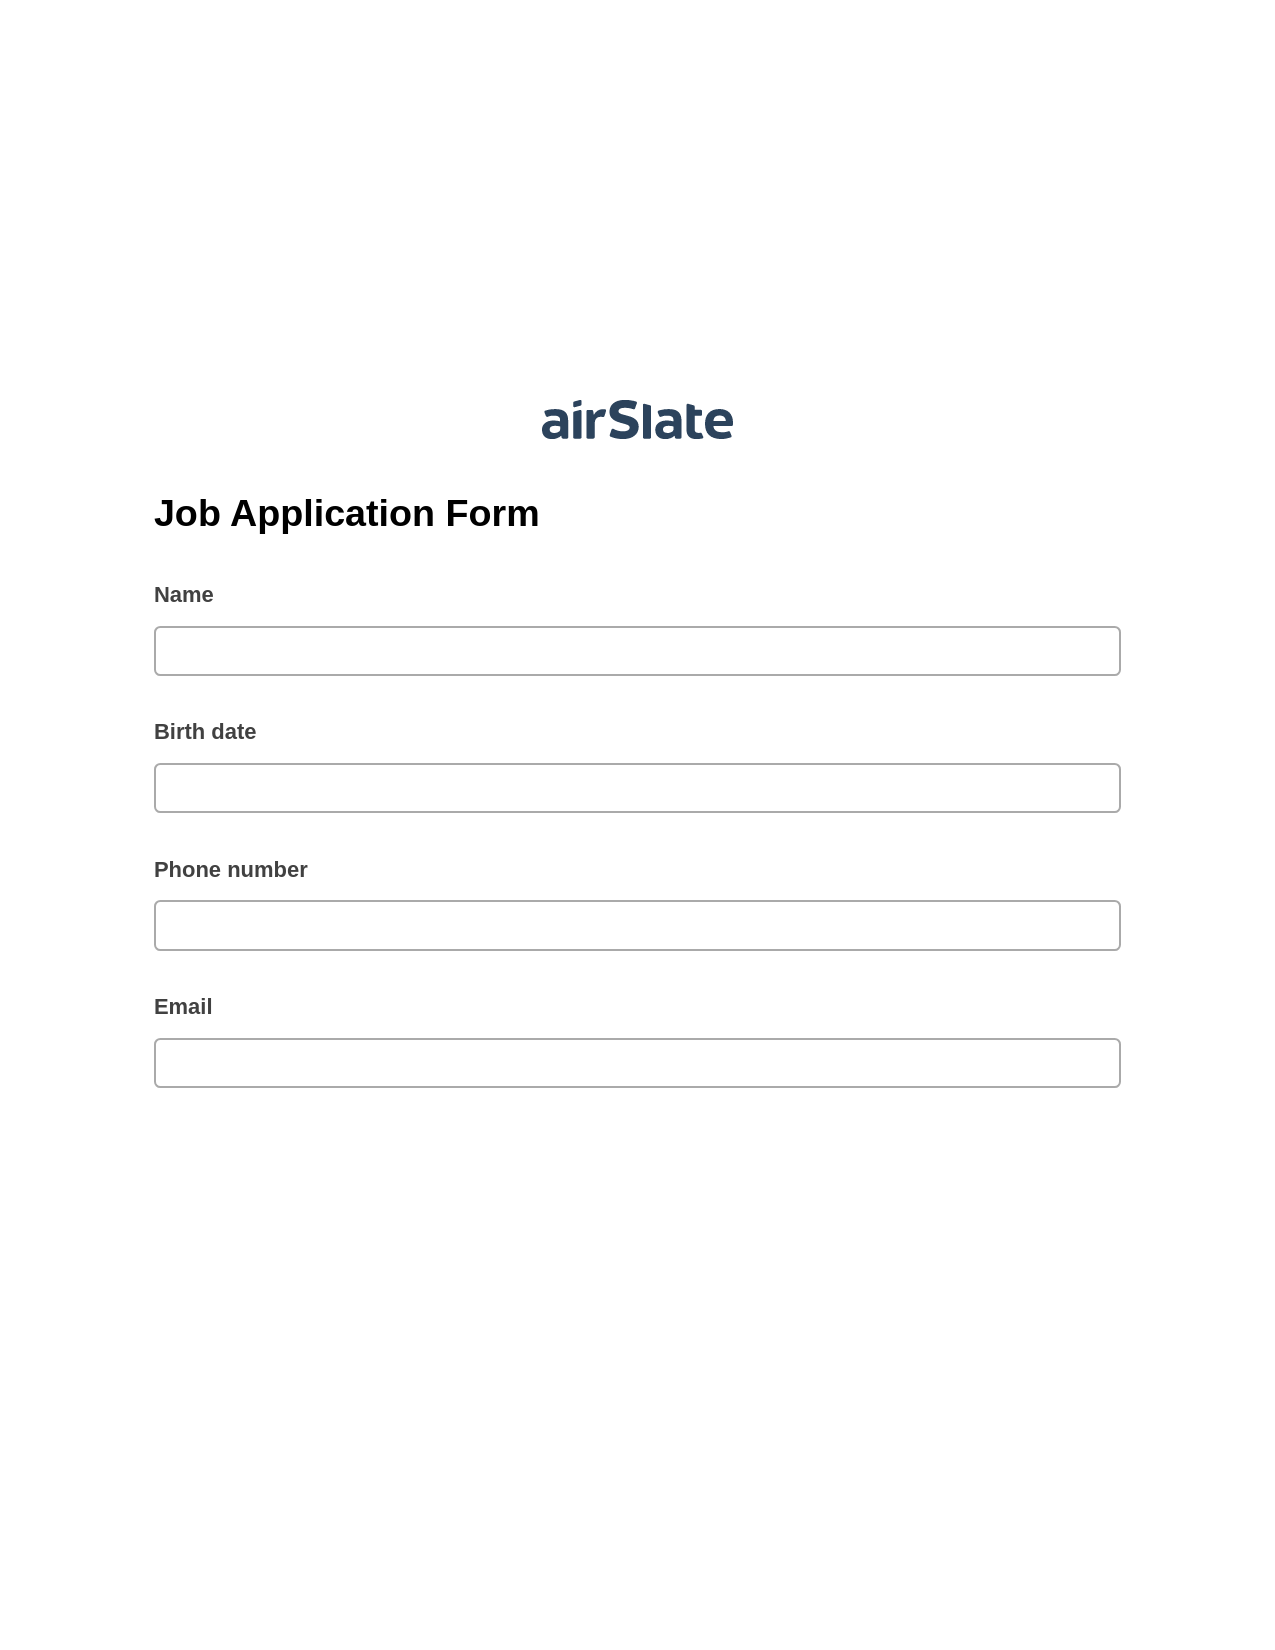 Multirole Job Application Form Pre-fill from Google Sheets Bot, Pre-fill with Custom Data Bot, Export to Excel 365 Bot